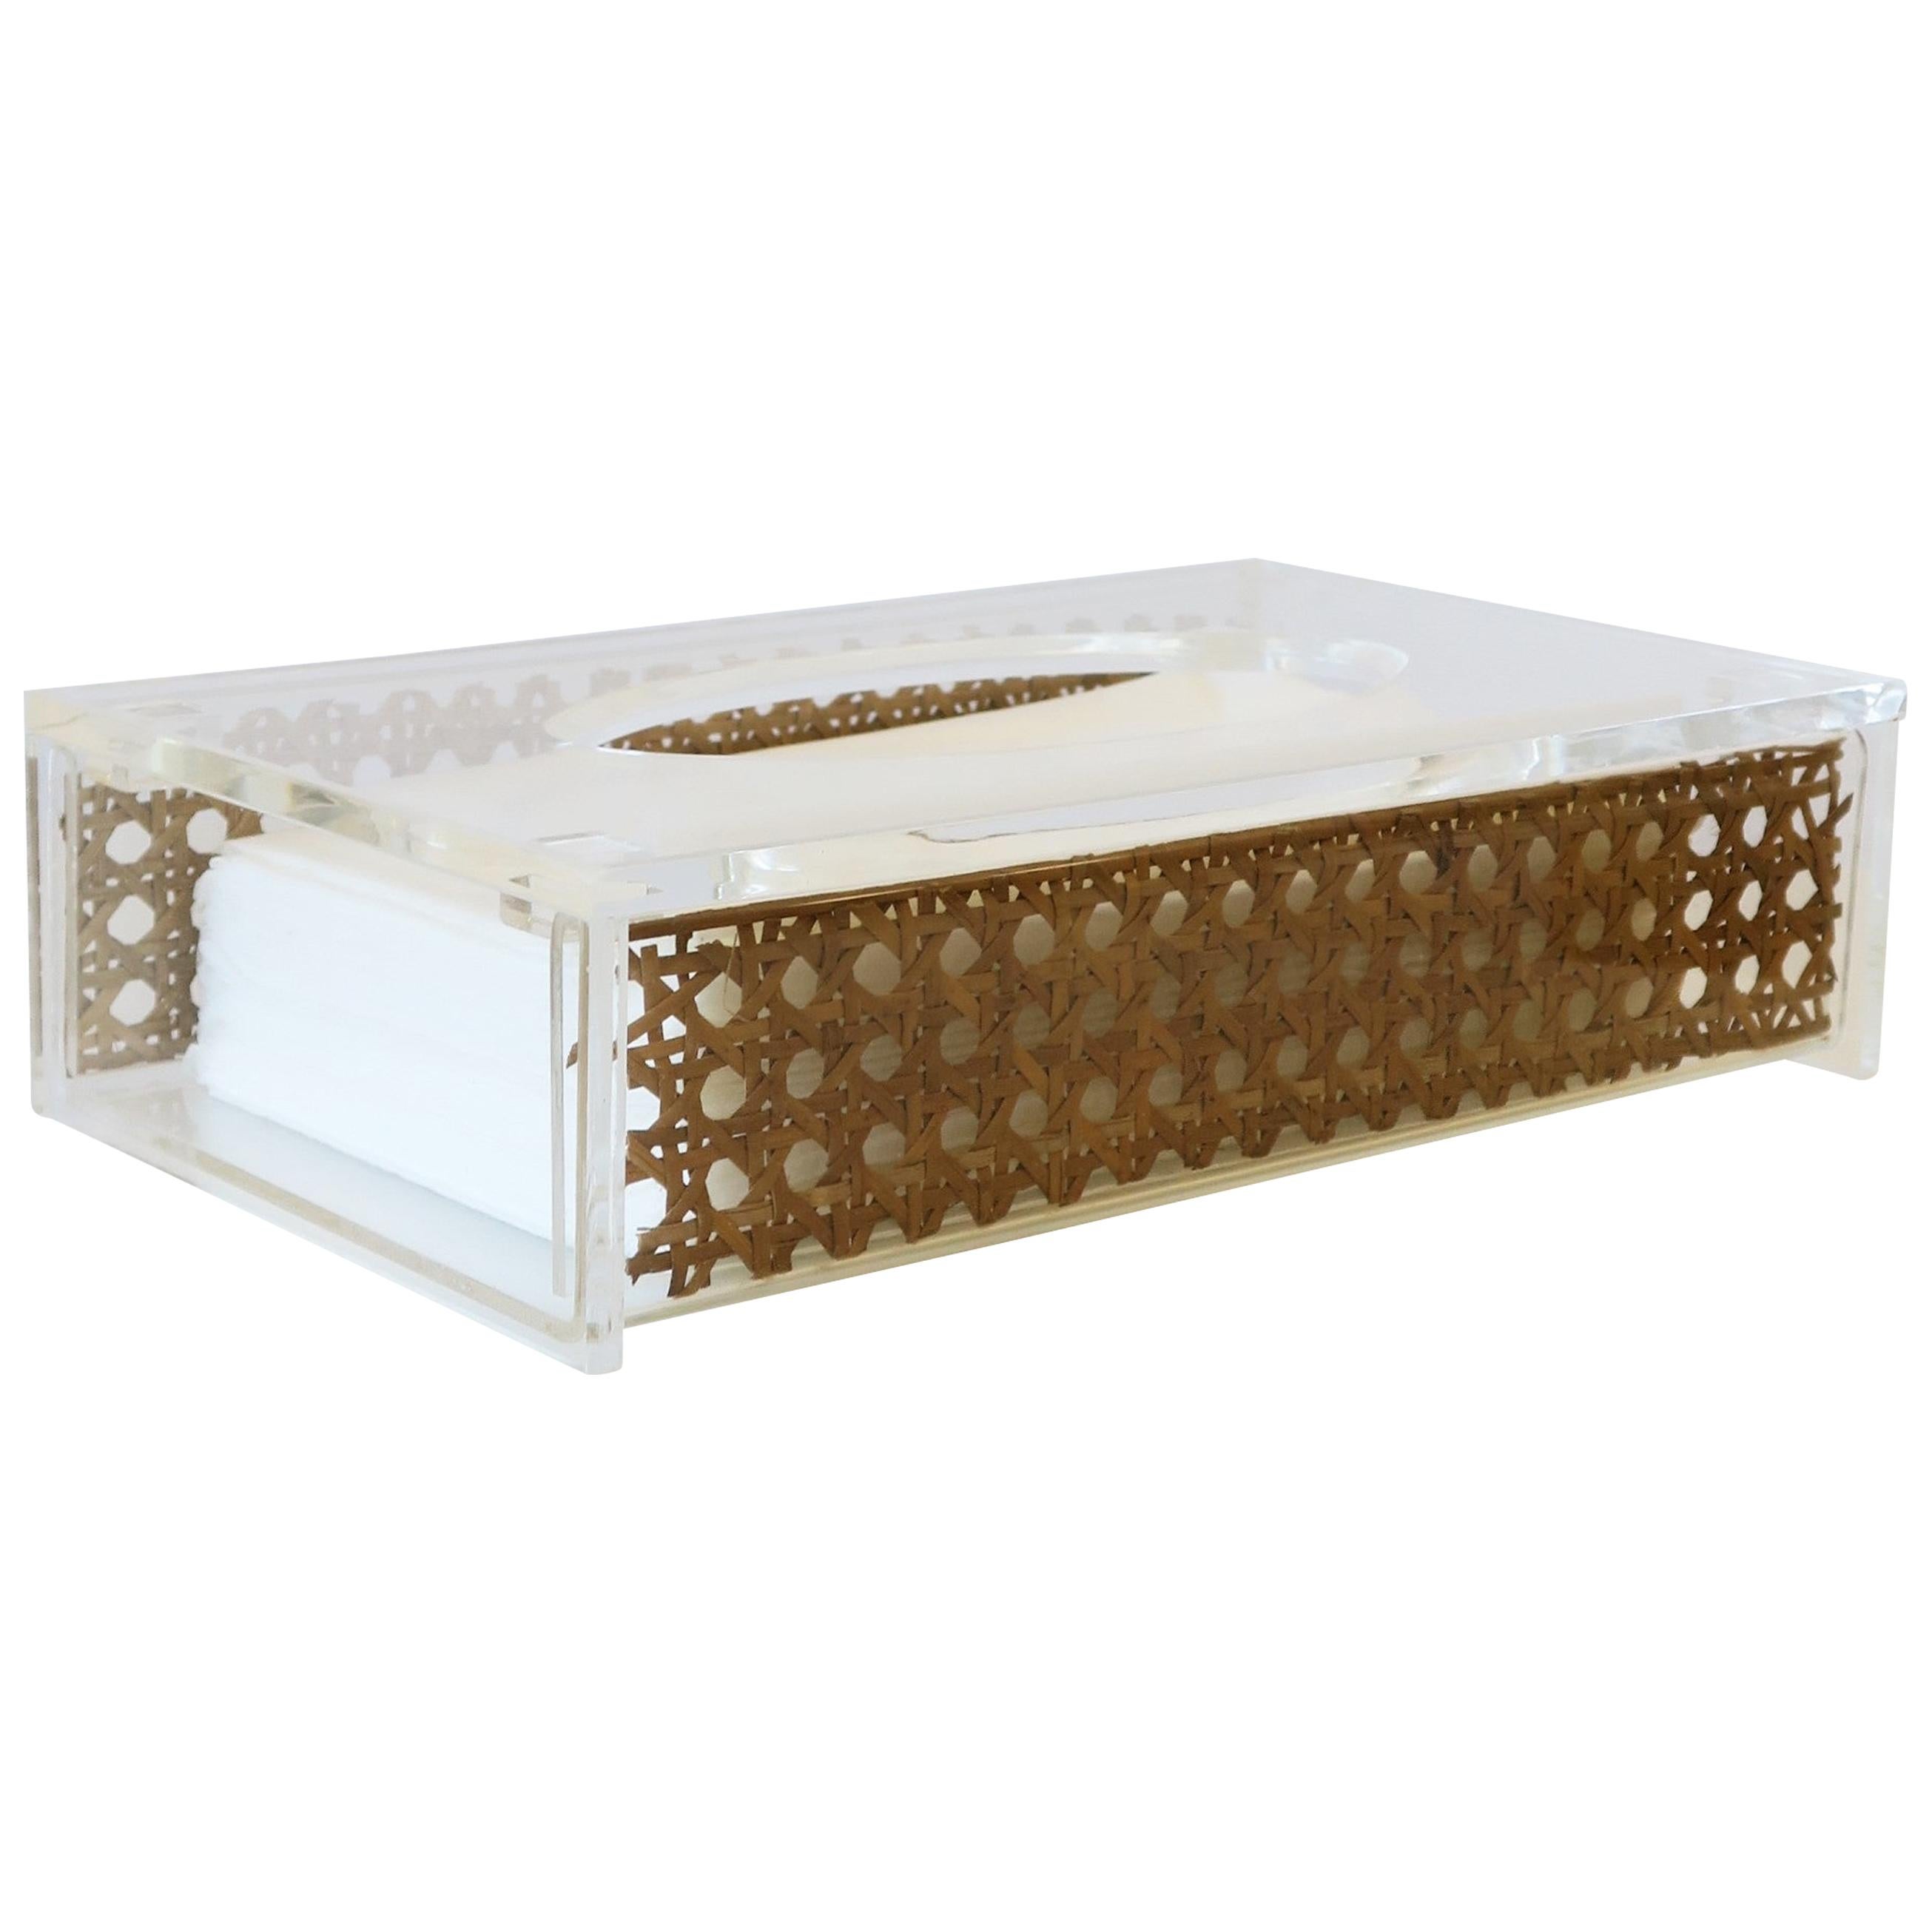 Wicker Cane and Acrylic Tissue Box Holder Cover in the style of Dior